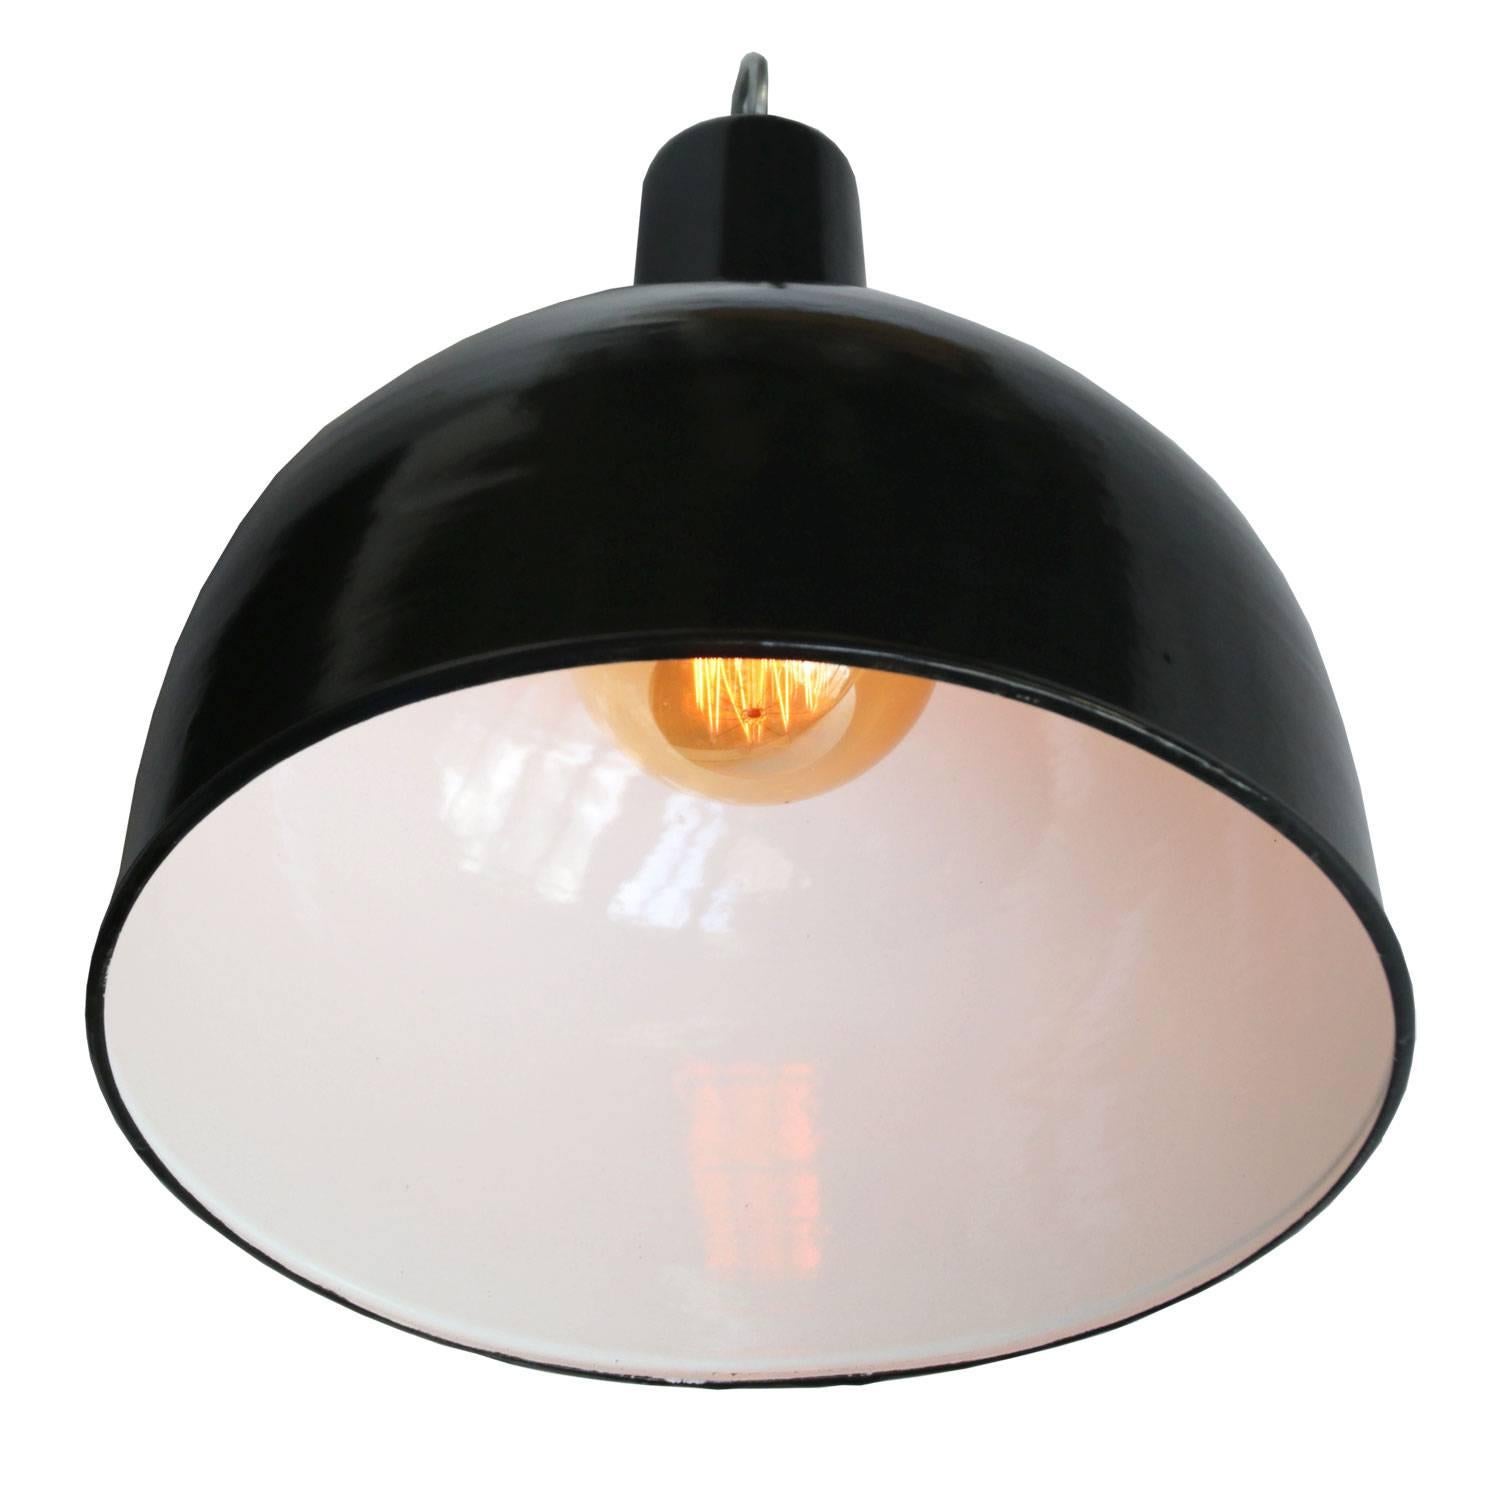 Factory hanging light. Black enamel. White interior.

Weight: 1.4 kg / 3.1 lb

All lamps have been made suitable by international standards for incandescent light bulbs, energy-efficient and LED bulbs. E26/E27 bulb holders and new wiring are CE